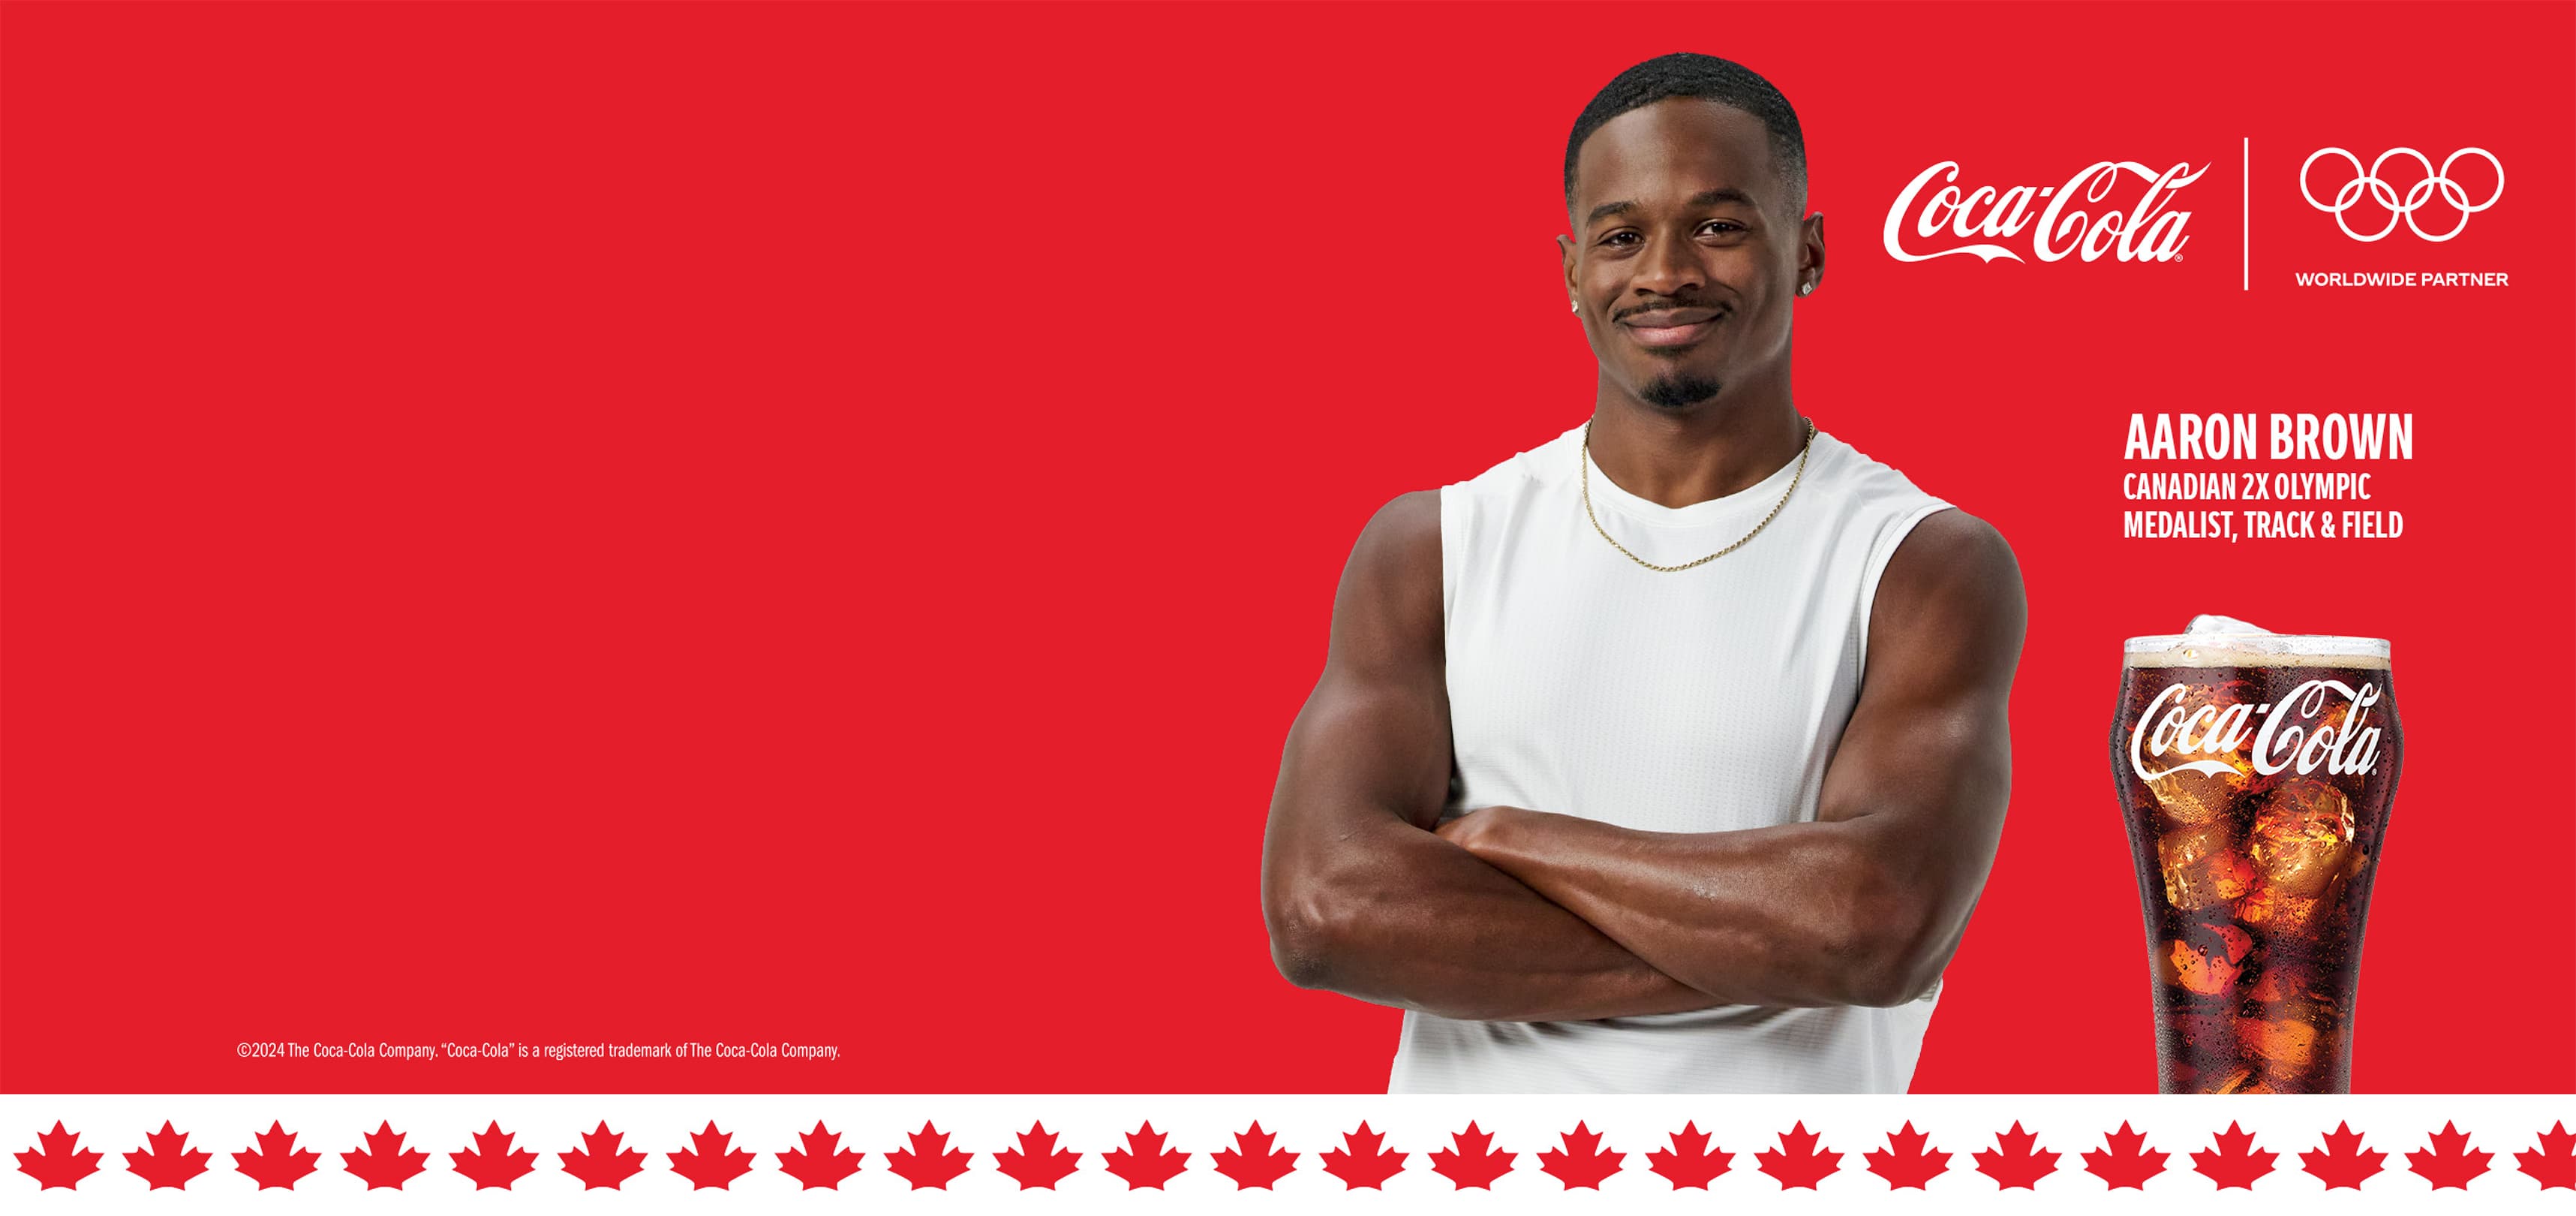 Coca-Cola + Olympic Games. Aaron Brown, Canada 2x Olympian, Medalist,  Track & Field